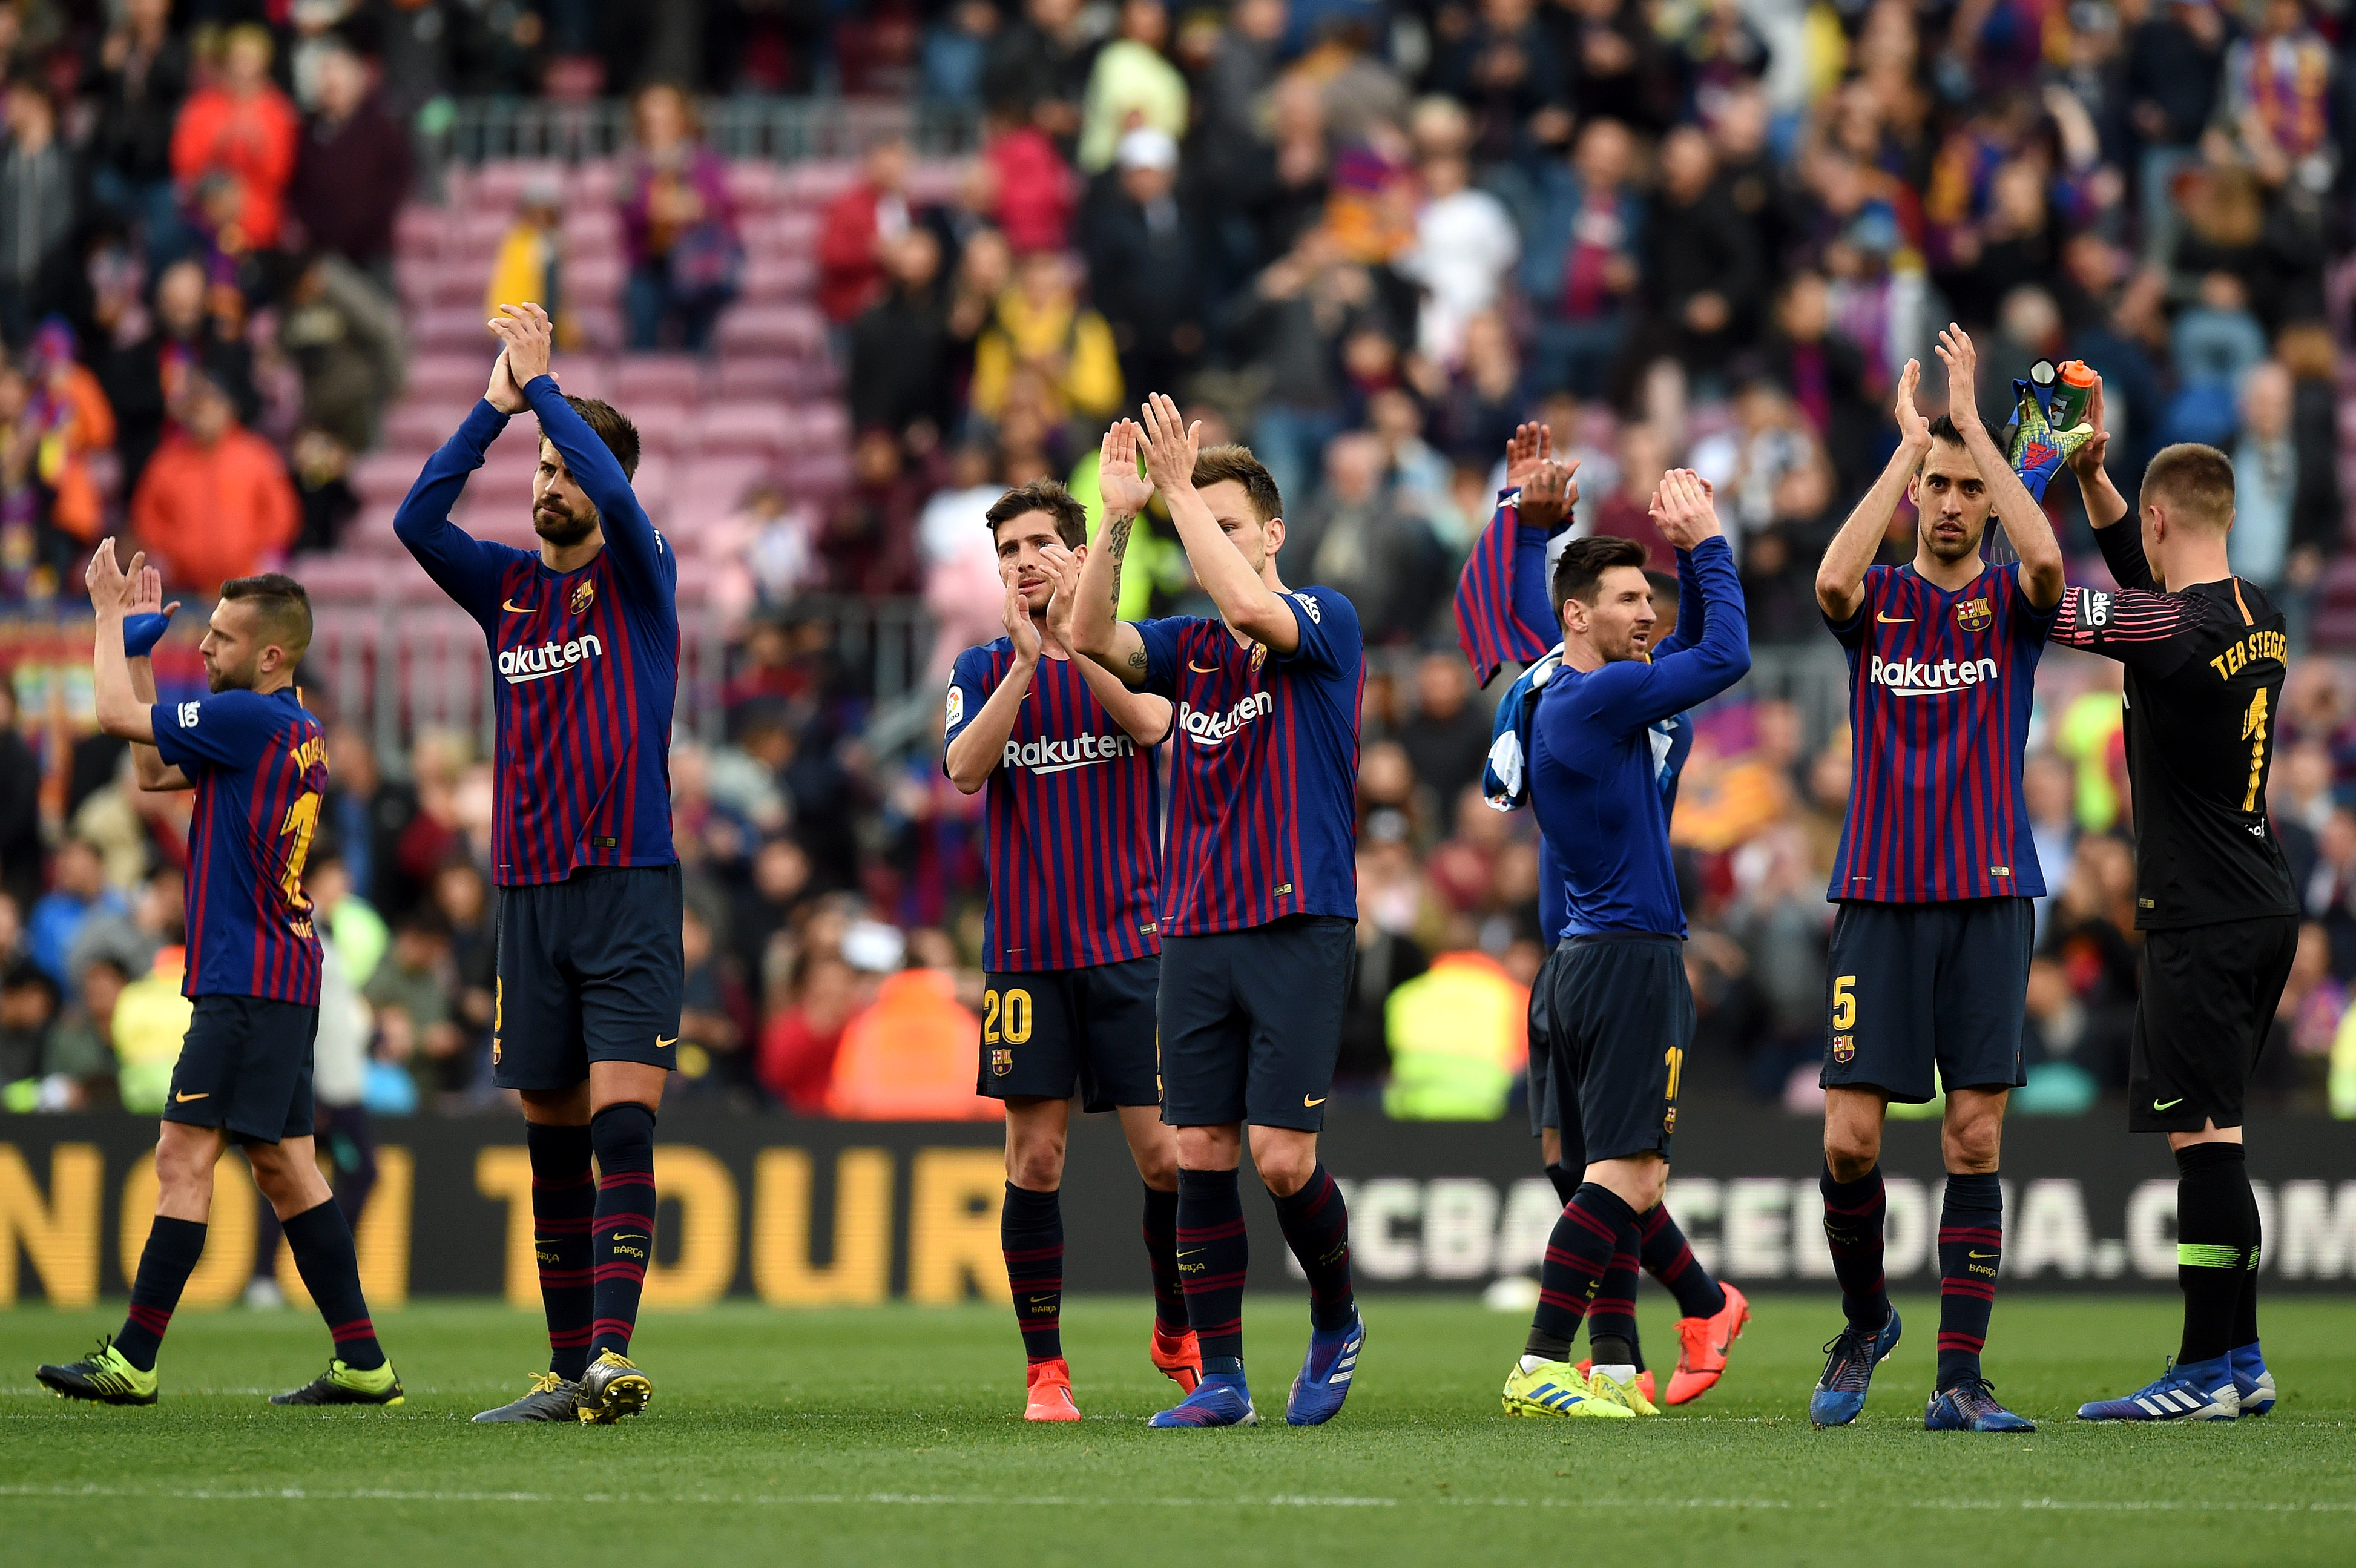 BARCELONA, SPAIN - MARCH 30: Barcelona players acknowledge the fans following the La Liga match between FC Barcelona and RCD Espanyol at Camp Nou on March 30, 2019 in Barcelona, Spain. (Photo by Alex Caparros/Getty Images)